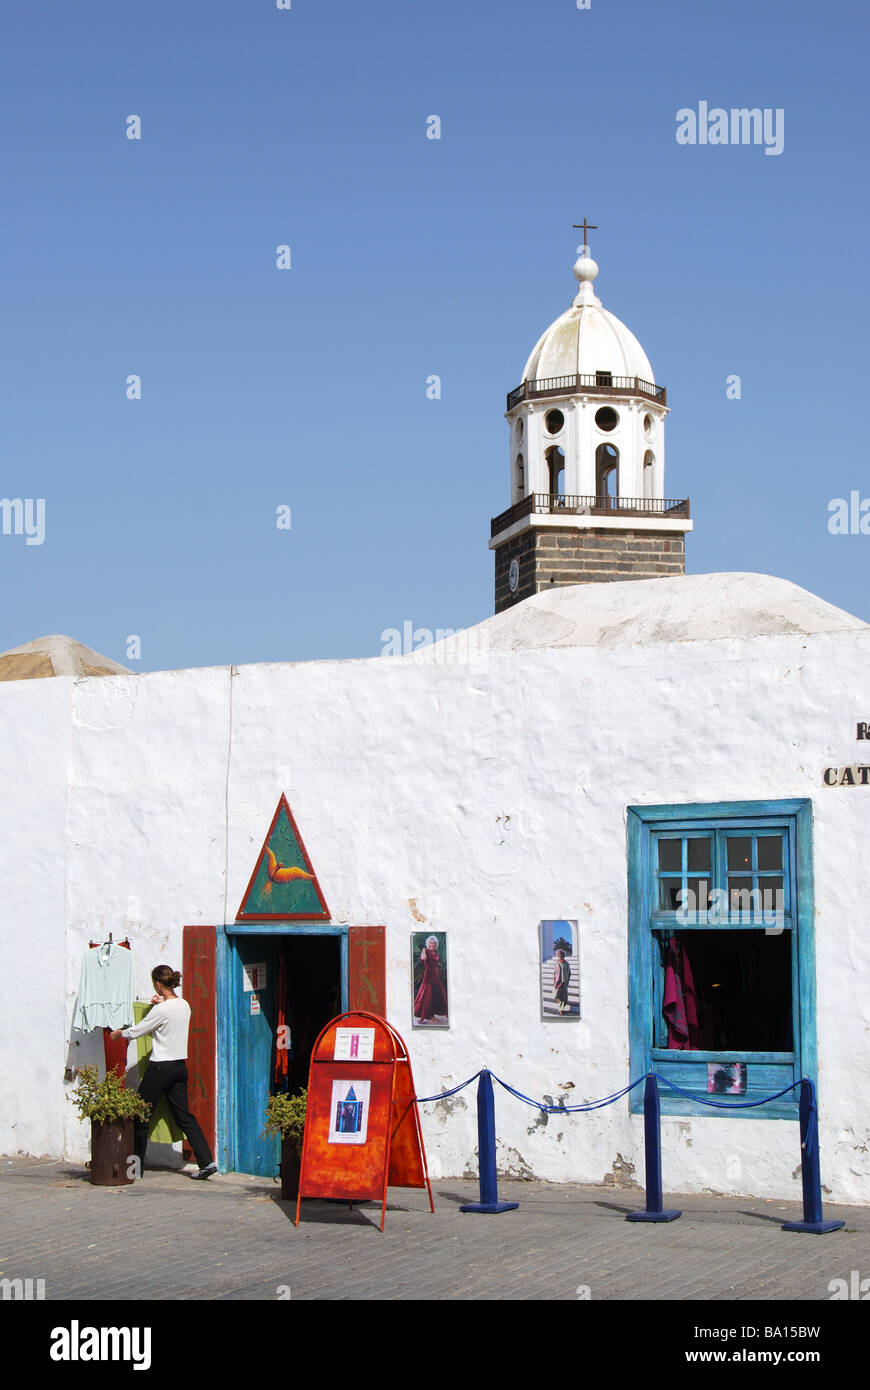 Fashion boutique, Teguise, Lanzarote, Canary islands, Spain Stock Photo